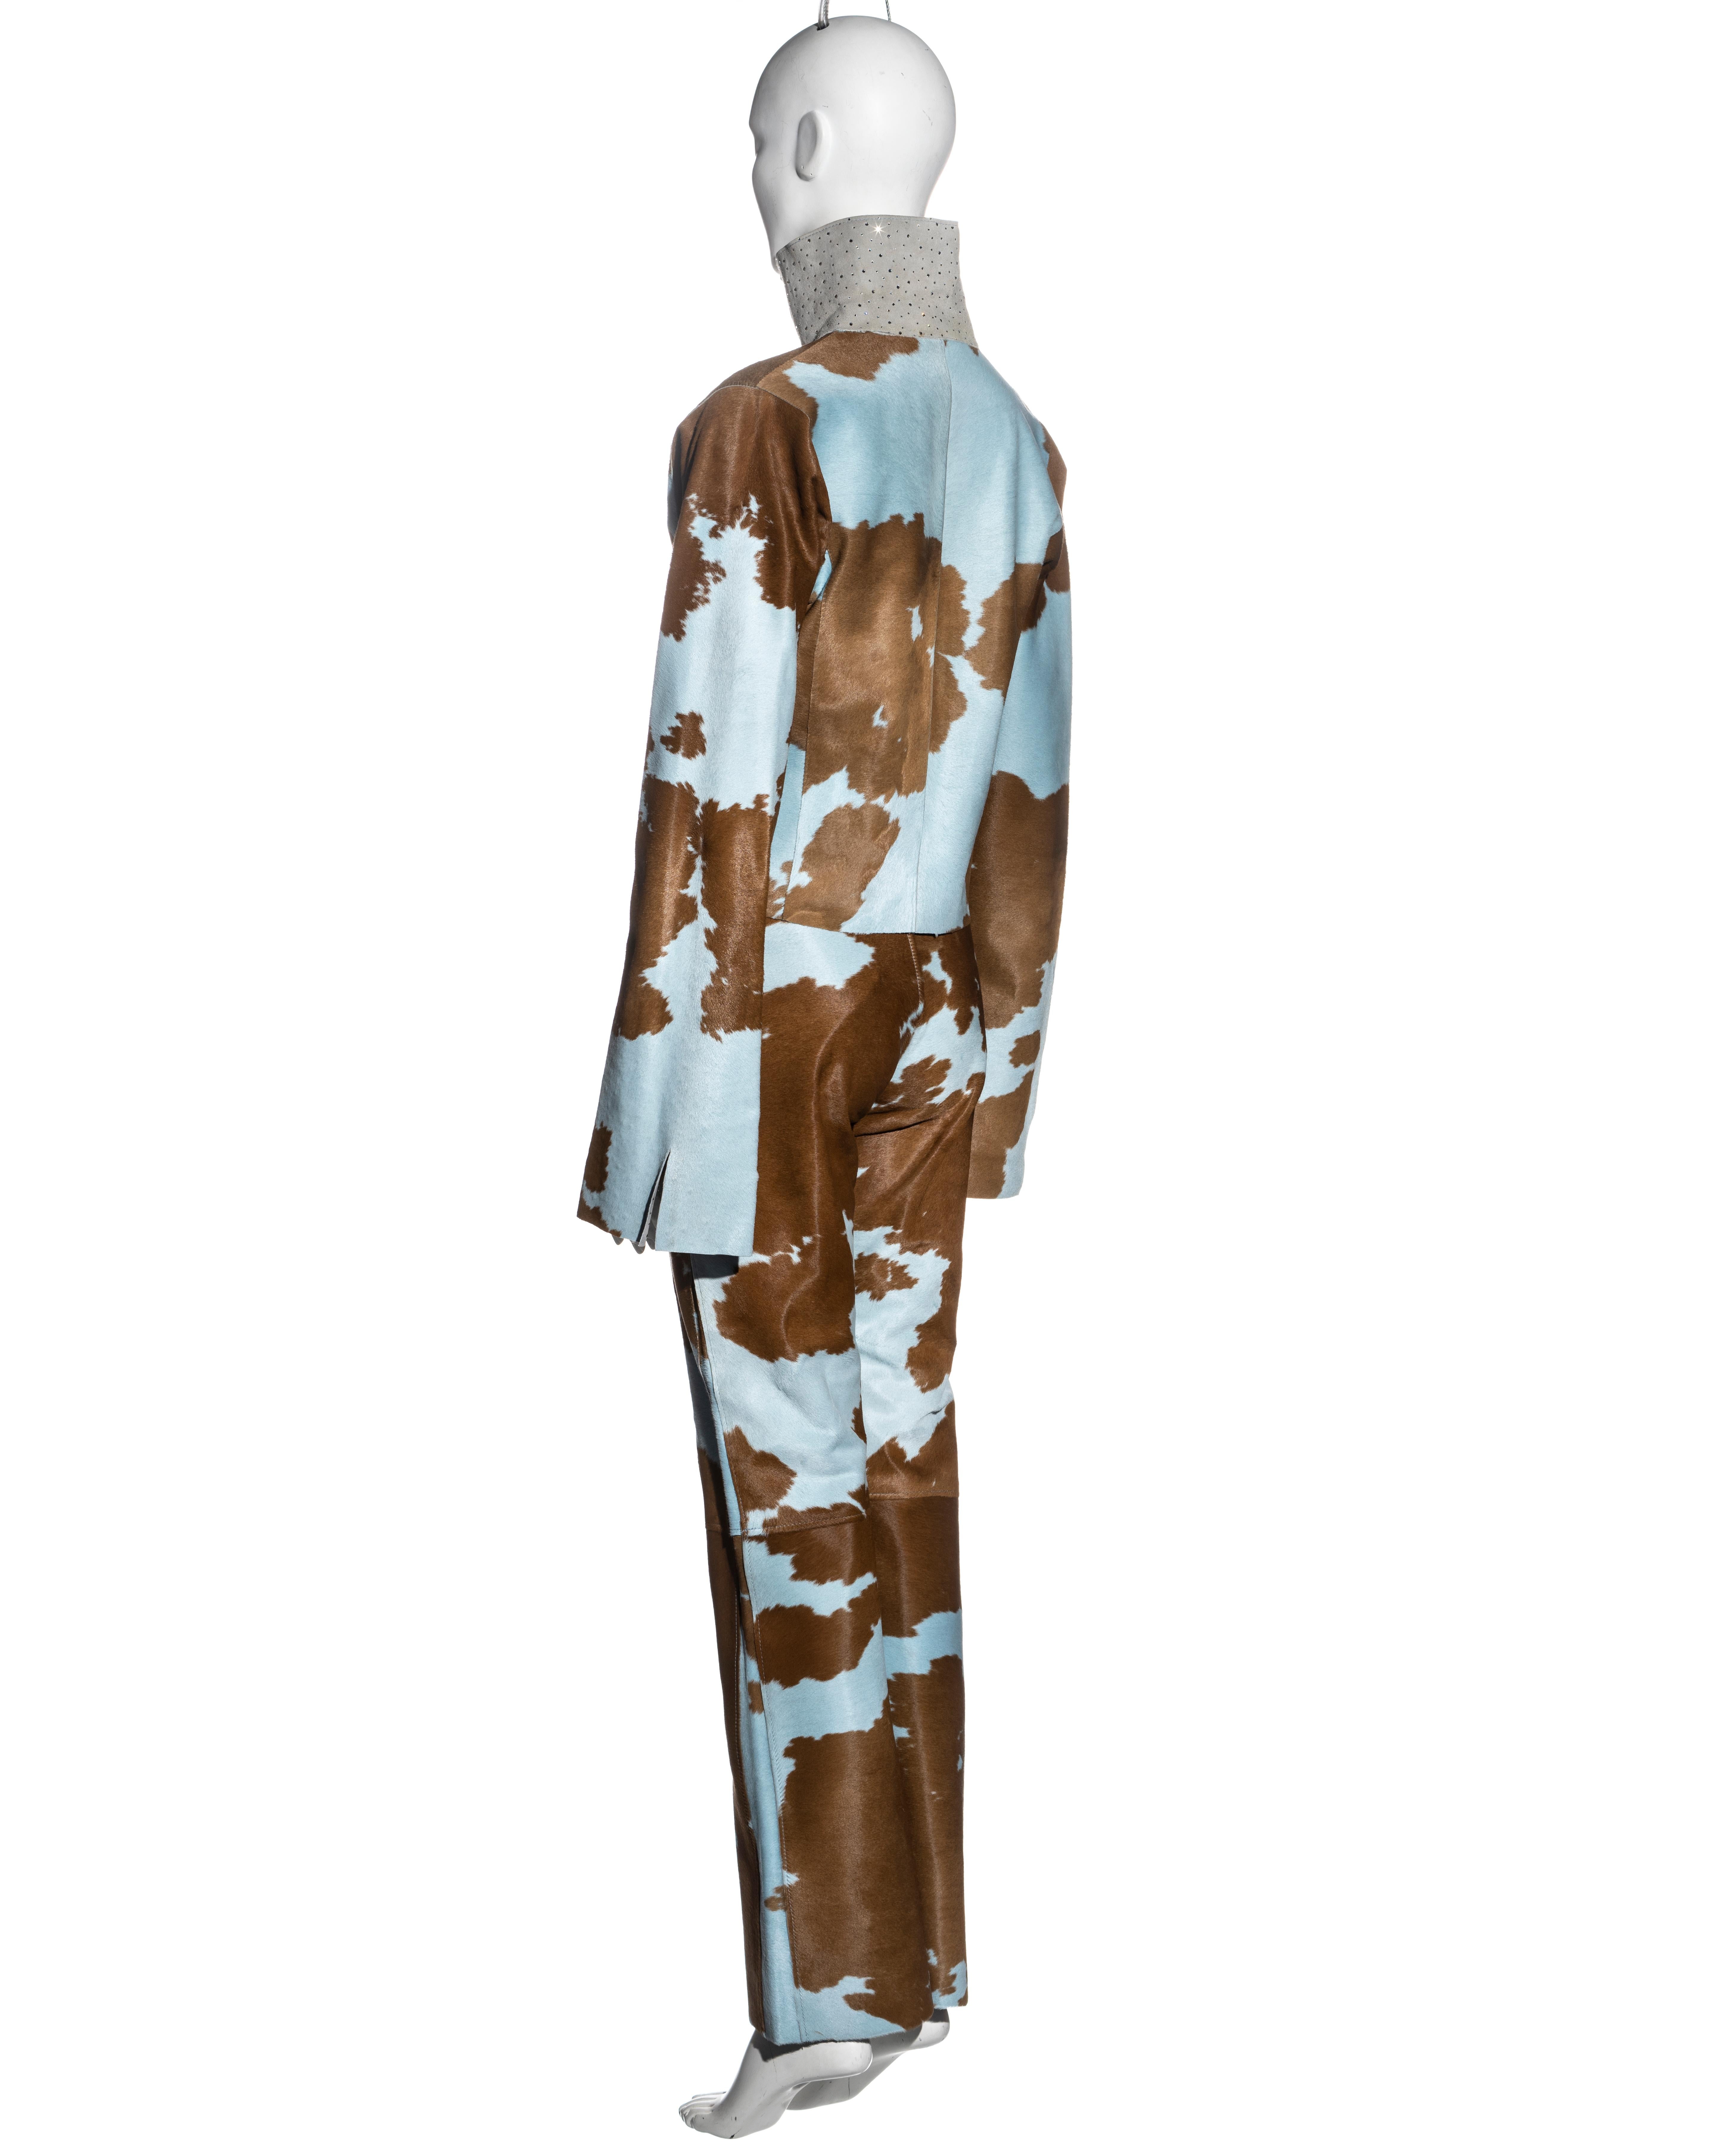 Fendi by Karl Lagerfeld blue and brown cowhide jacket and pants set, fw 1999 For Sale 3